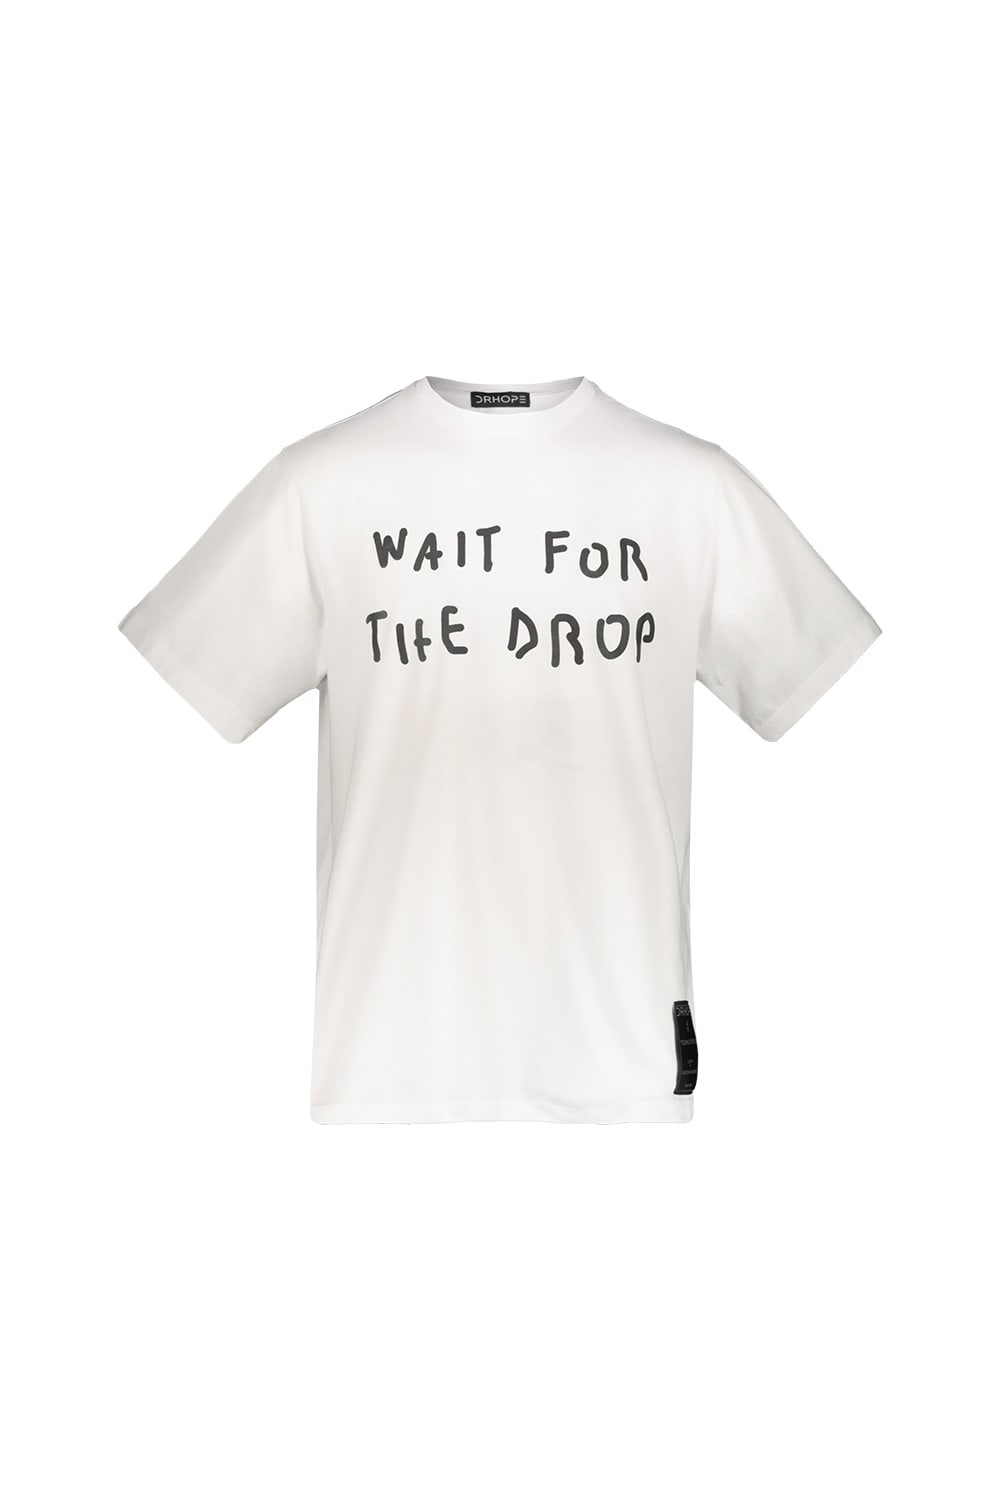 Drhope T-shirt With Wait For The Drop Black Print In White